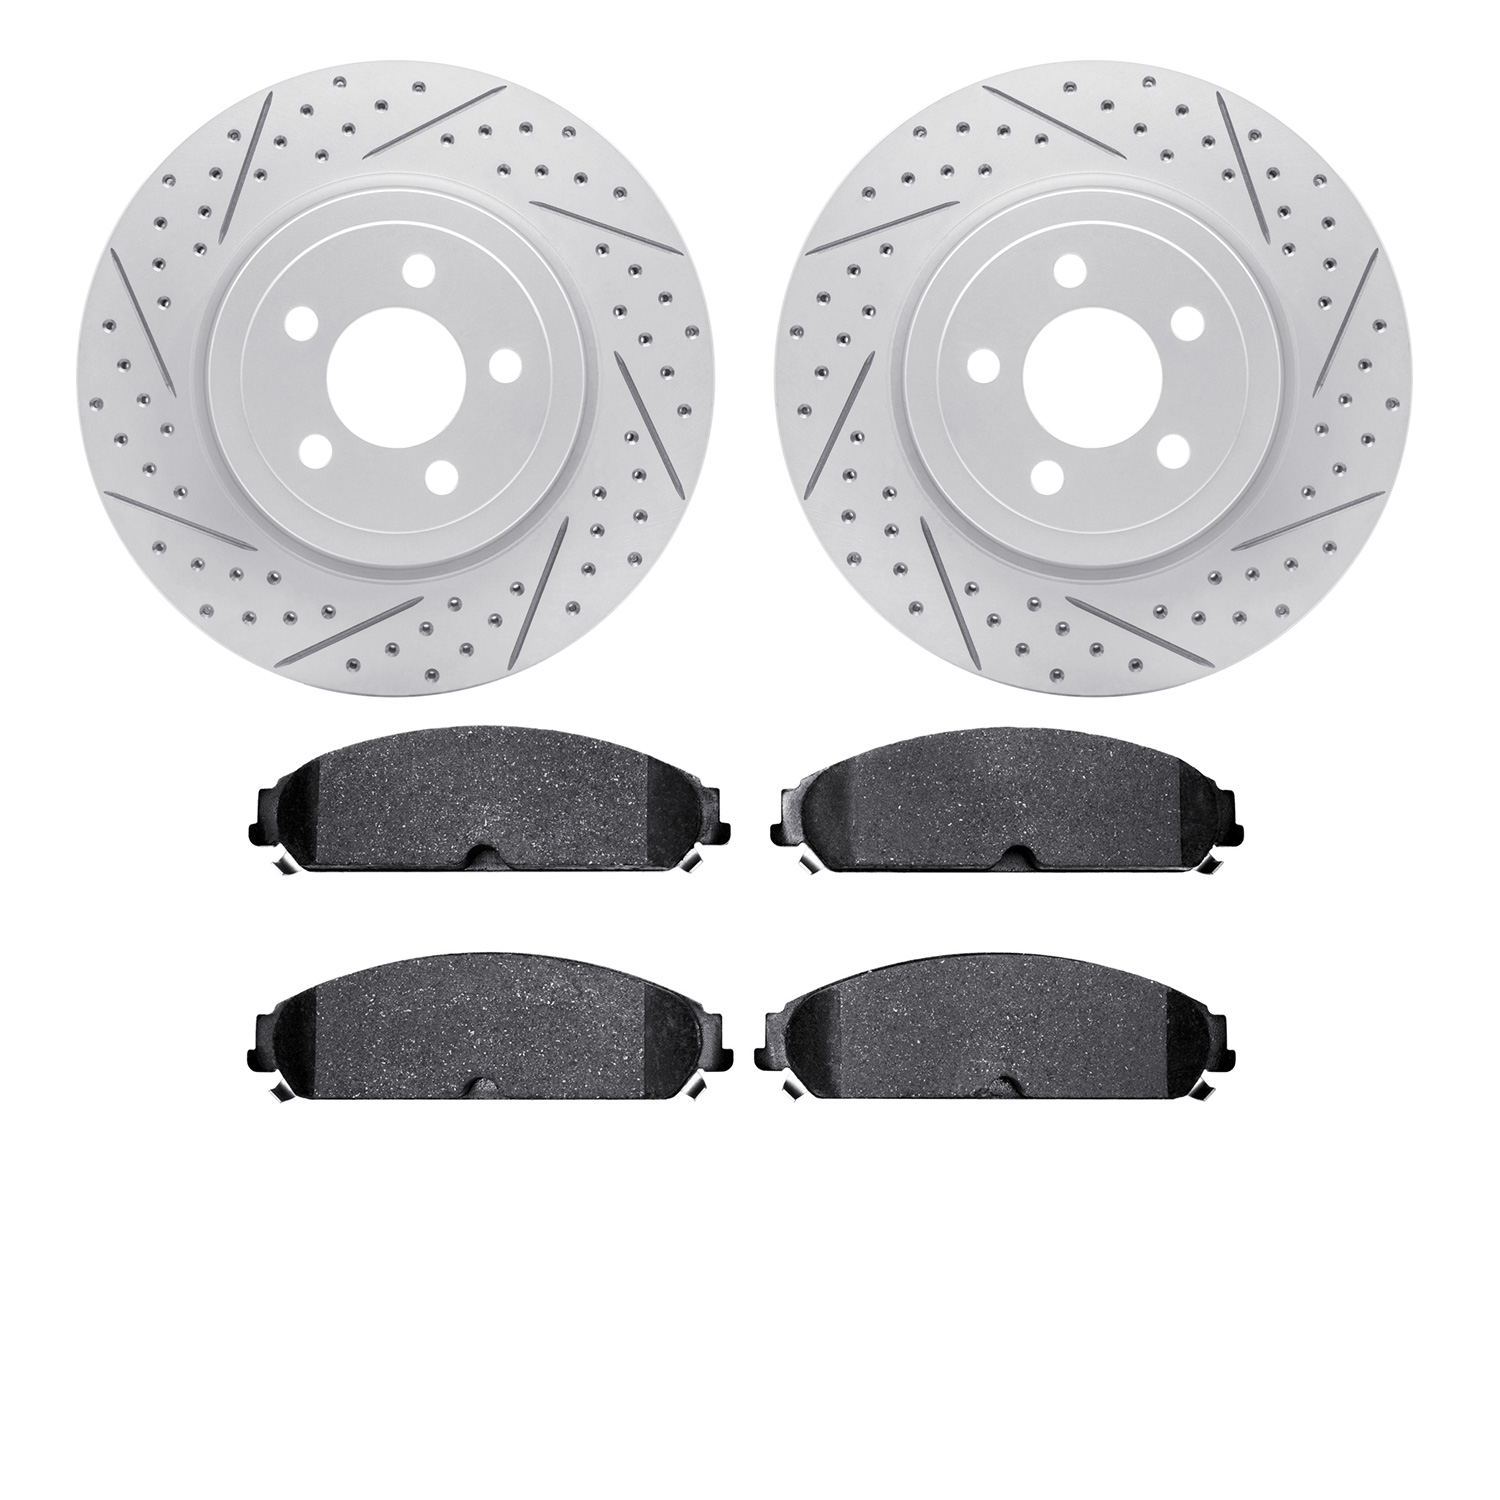 2502-39012 Geoperformance Drilled/Slotted Rotors w/5000 Advanced Brake Pads Kit, Fits Select Mopar, Position: Front